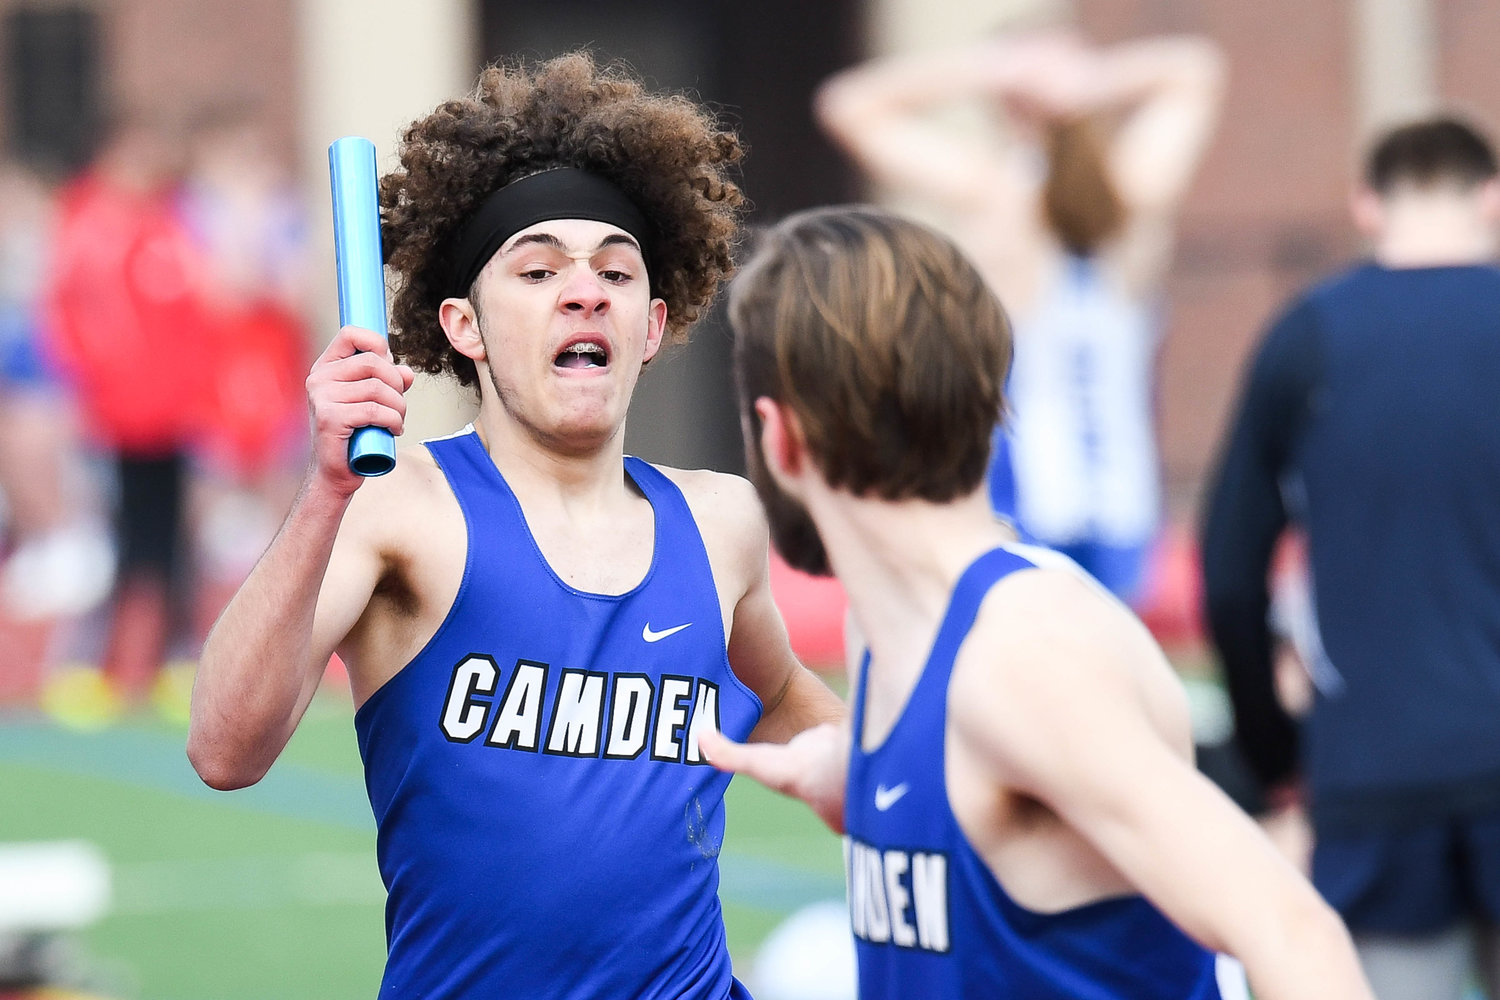 From left, Camden's Elijah Jackson hands the baton off to a teammate in the distance medley relay during the track and field meet on Tuesday at PHS Stadium in Utica.